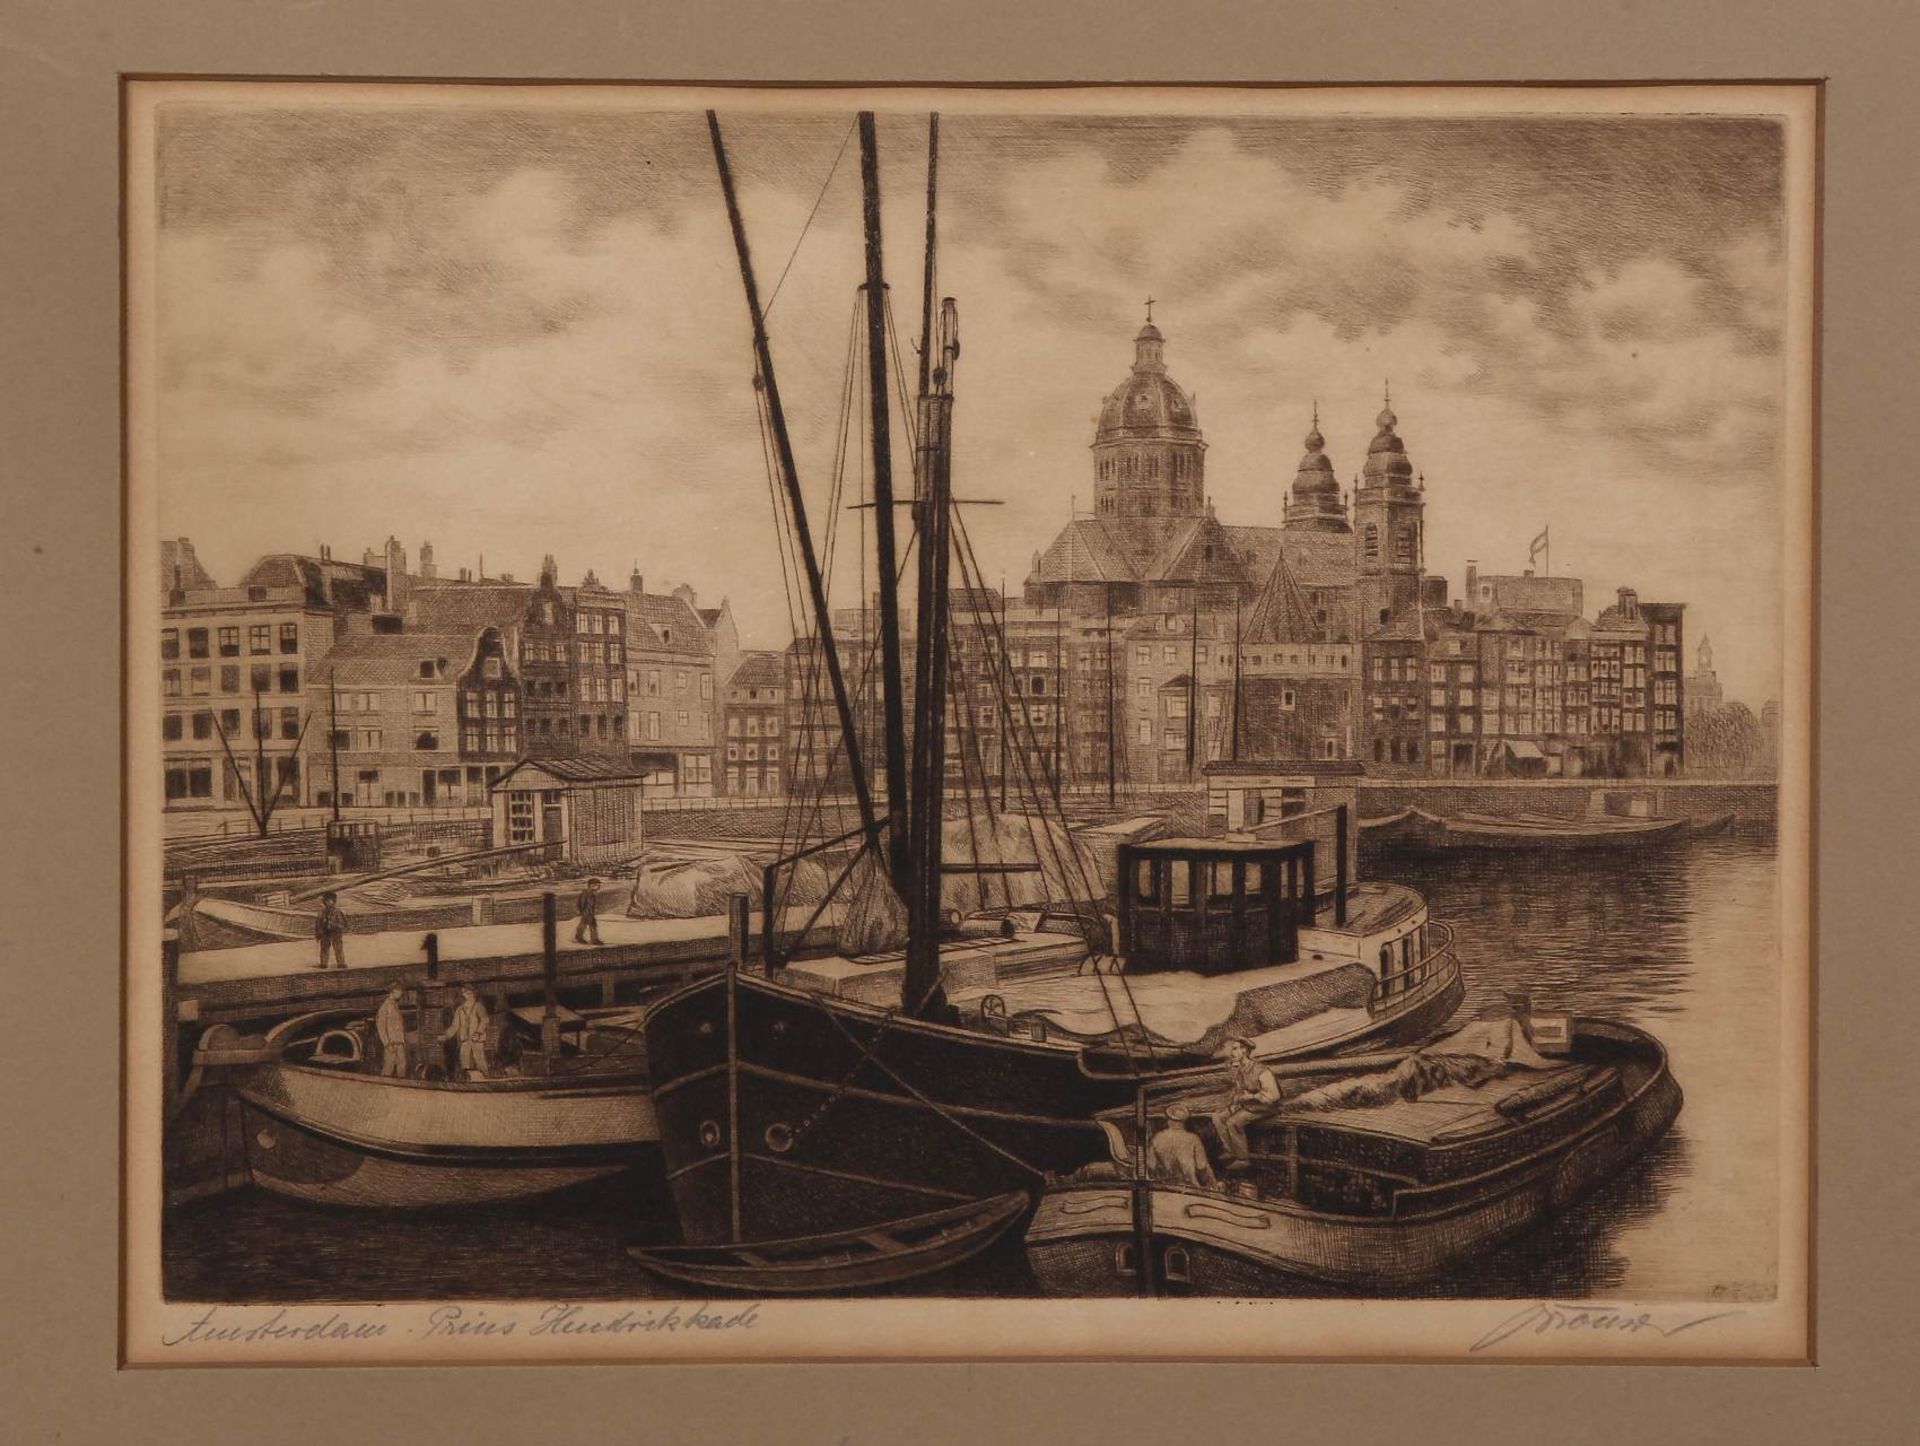 Brouwer etching about 1930, Prince Hendrik quay Amsterdam, etching on paper 30x22cm Cond: G